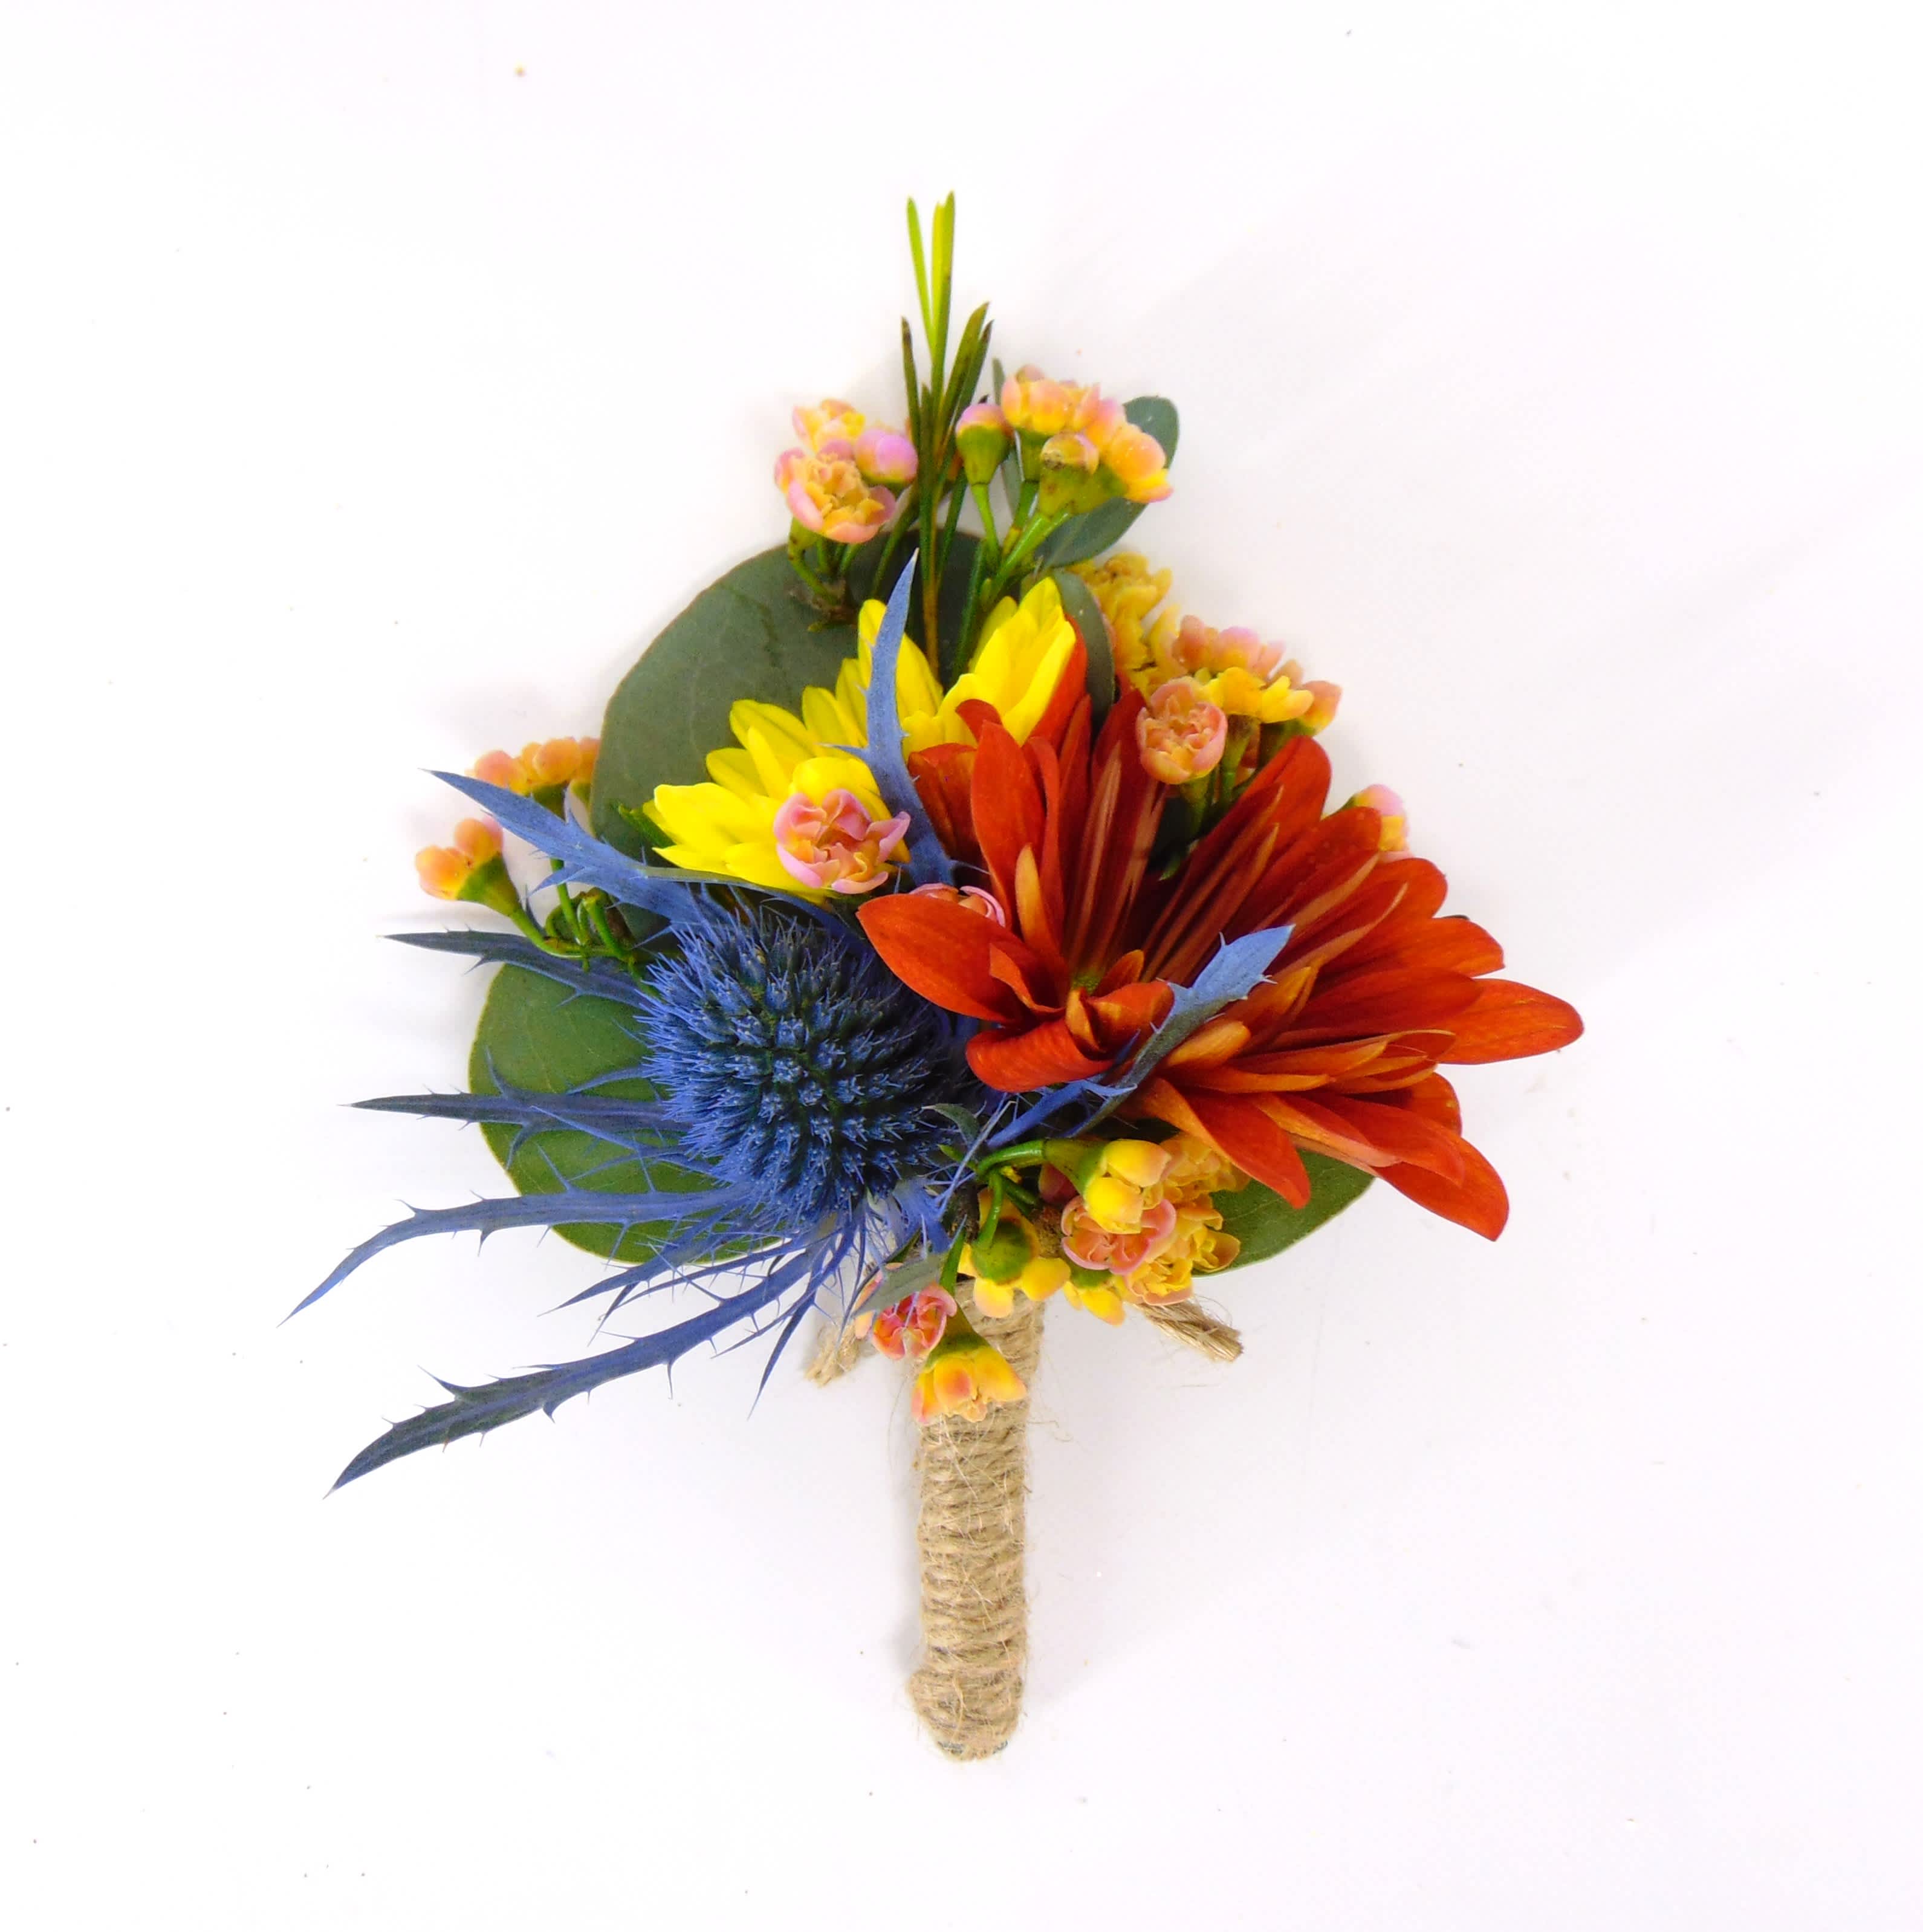 Mini Sunflower-Daisy-Thistle Boutonniere - Mine sunflower viking mum, rust daisy mum, blue thistle, gold/peach waxflower, eucalyptus greens and twine wrap. Includes boutonniere box.